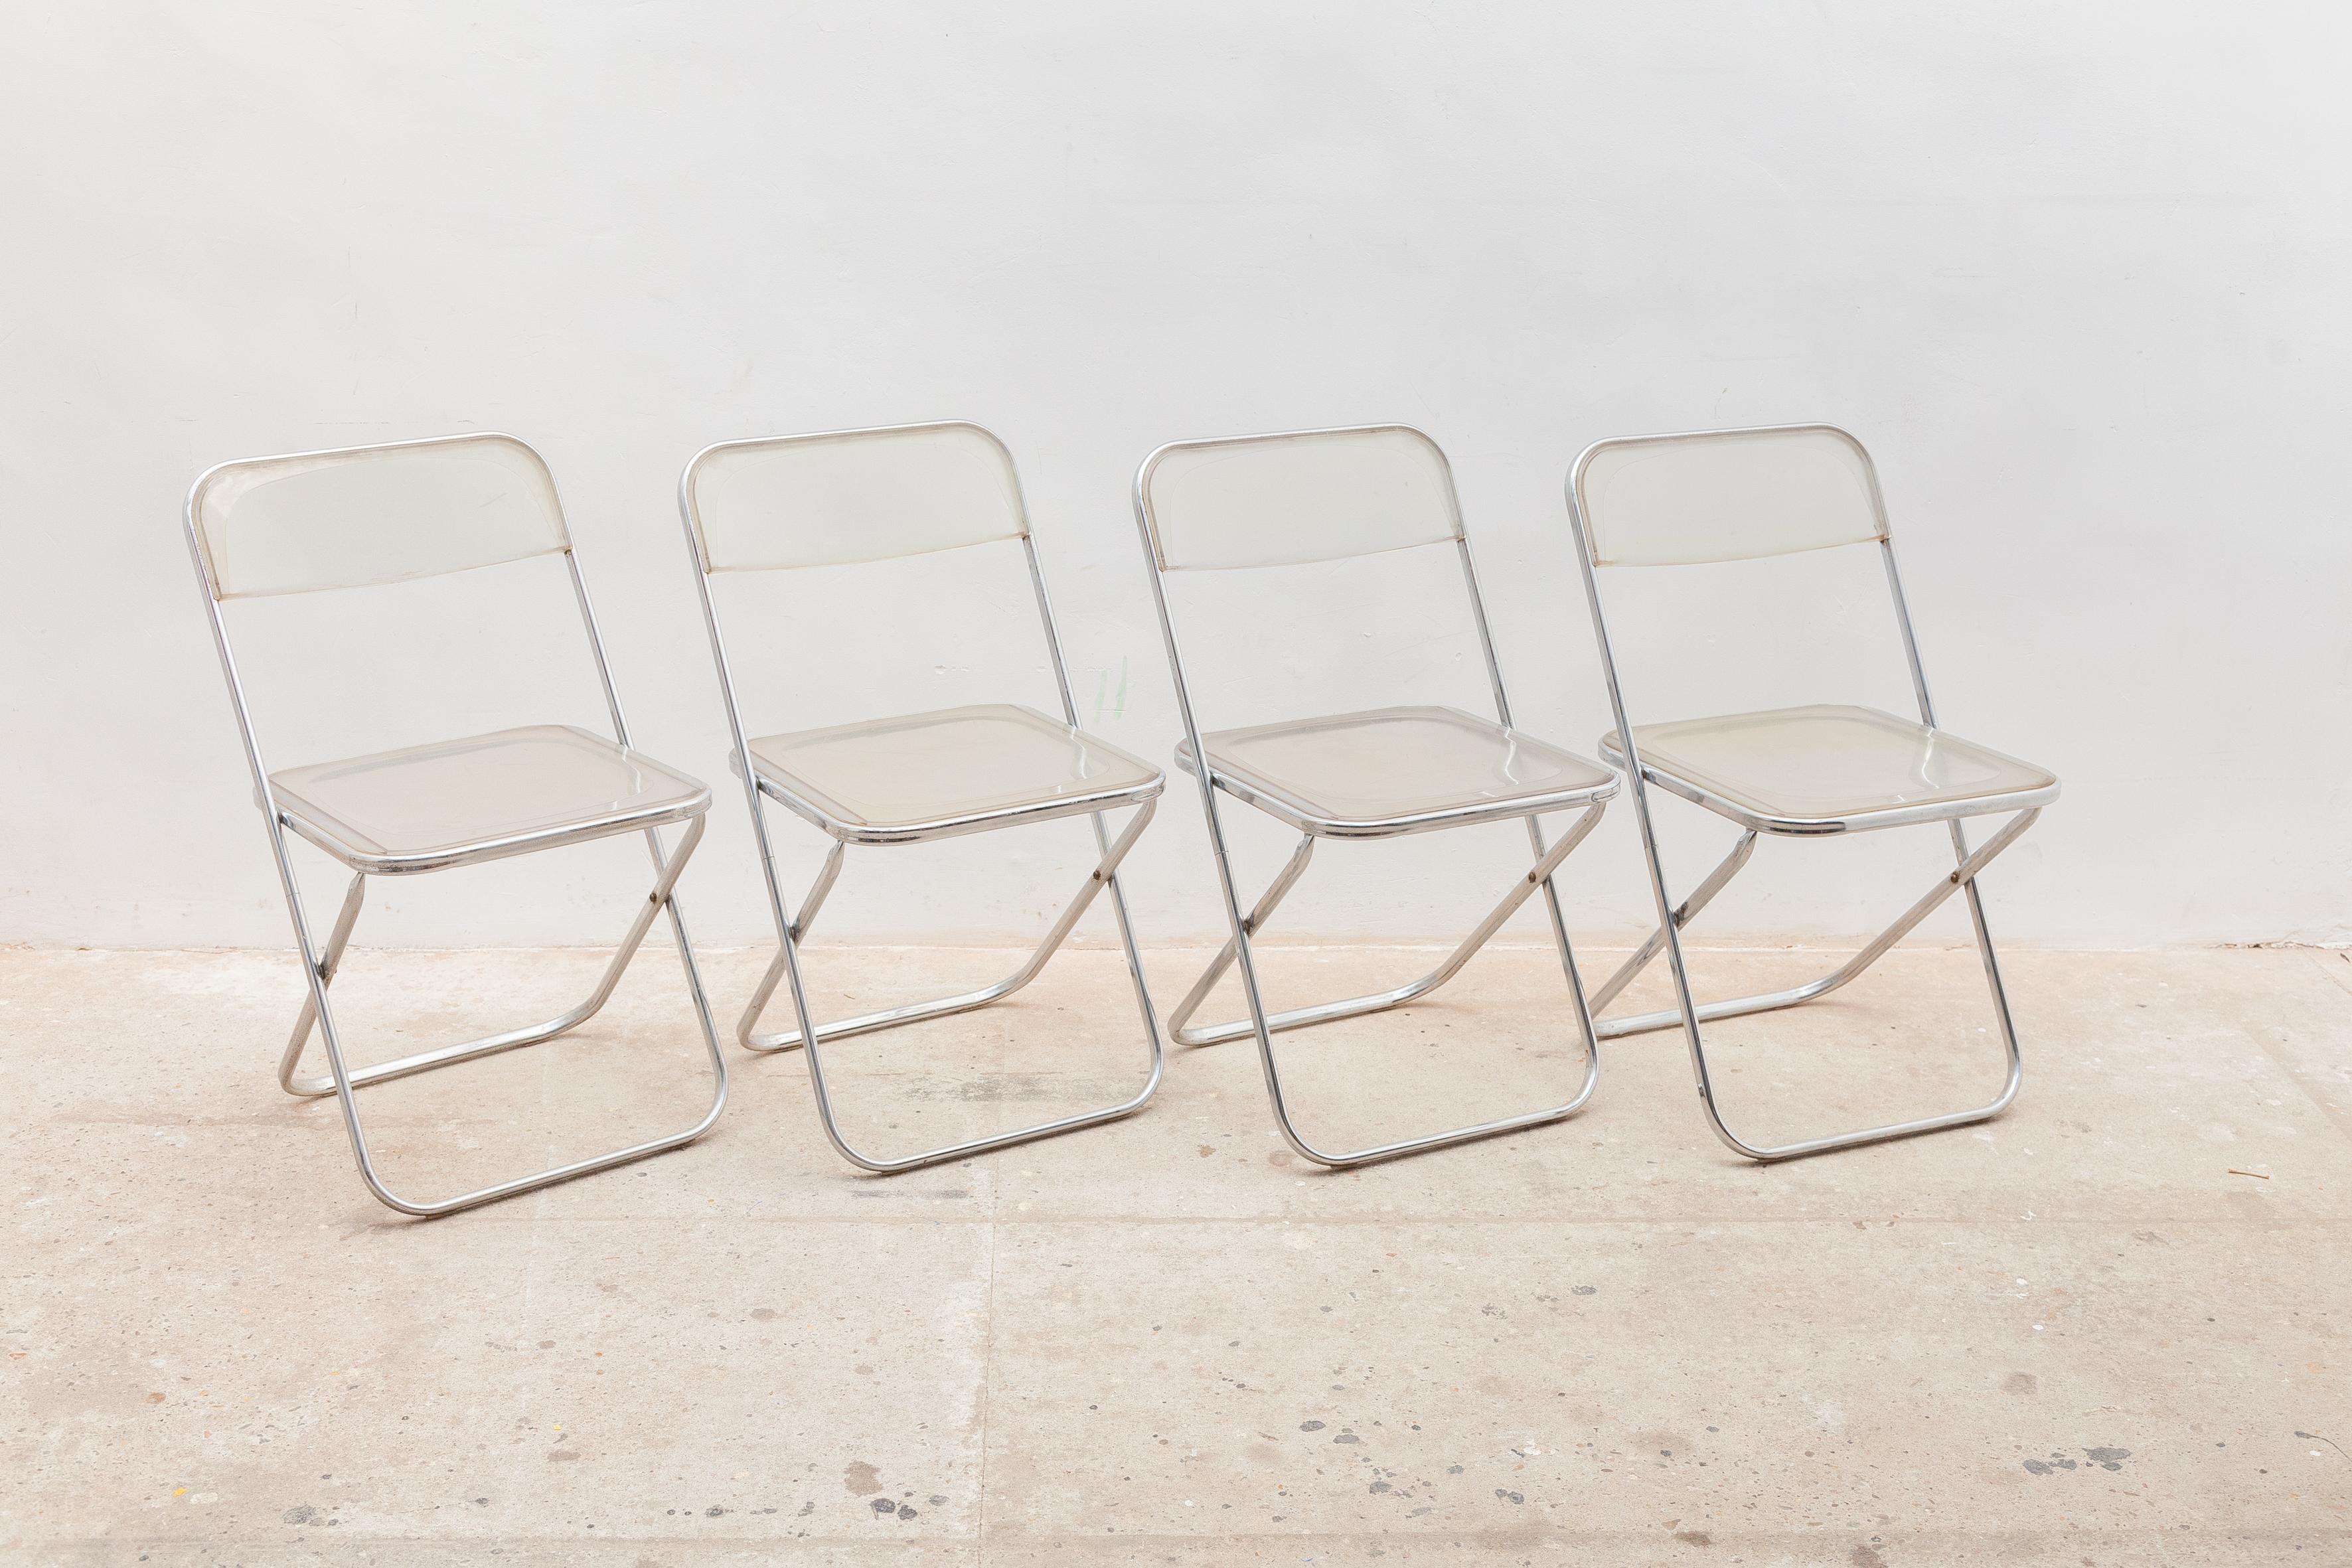 Beautiful set of four Castelli folding chairs from the 1970s in the style of Giancarlo Piretti's Plia chairs, circa 1970's featured in chrome-plated steel, cast aluminum and ABS plastic al in a good vintage condition. Some scratches on the lucite.